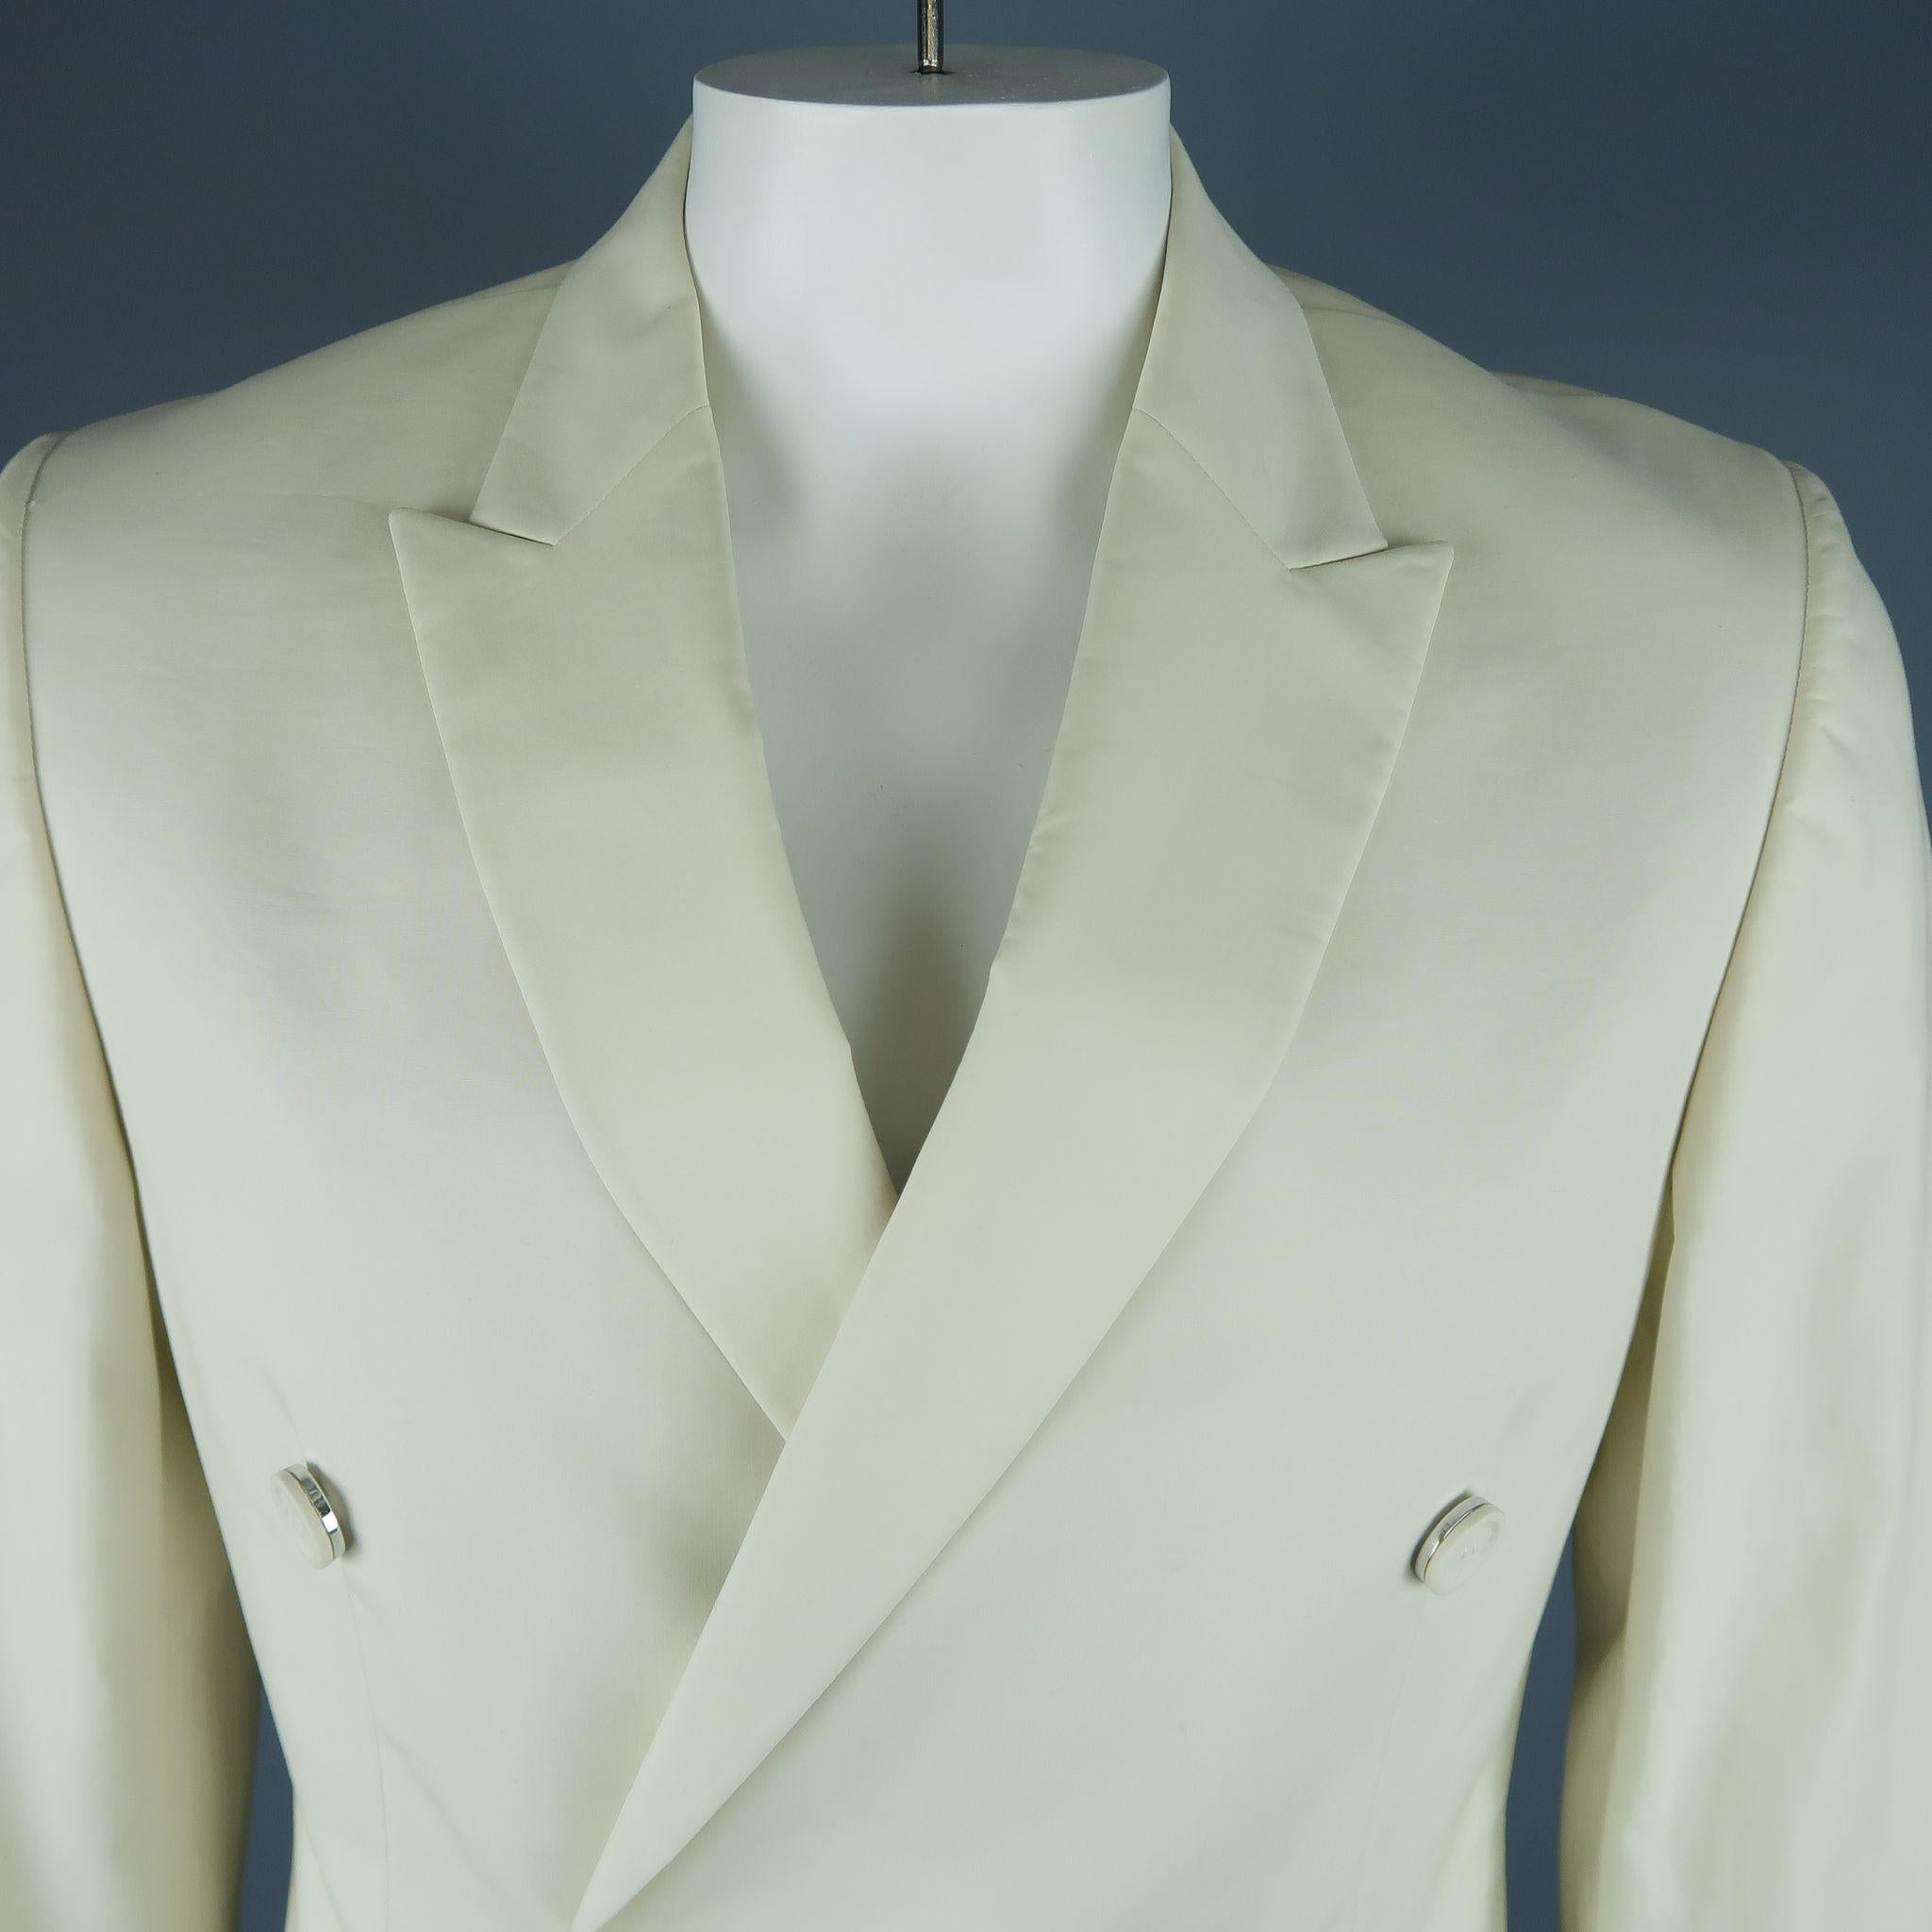 CALVIN KLEIN COLLECTION sport coat comes in a bone white with a full liner featuring a peak lapel, flap pockets, and a double breasted closure. Made in Italy.

New With Tags. 
Marked: 52/42
Original Retail Price: $2,400.00

Measurements:

Shoulder: